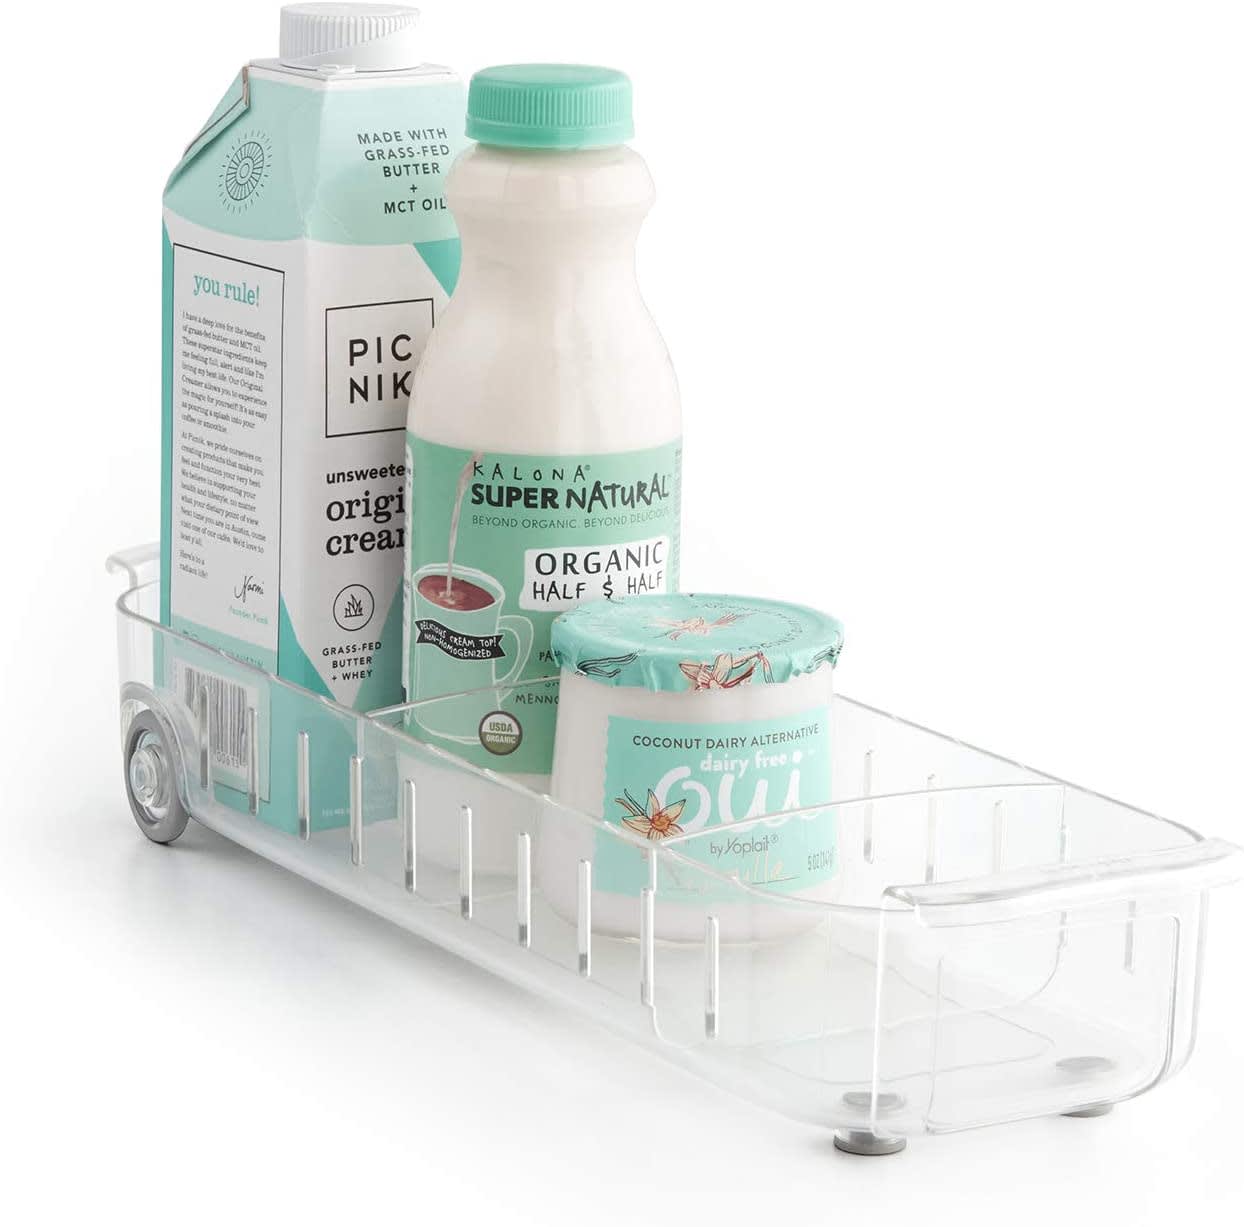 YouCopia RollOut Fridge Caddy w/ Soft-Spinning Wheels - 9 Wide (FREE  SHIPPING)